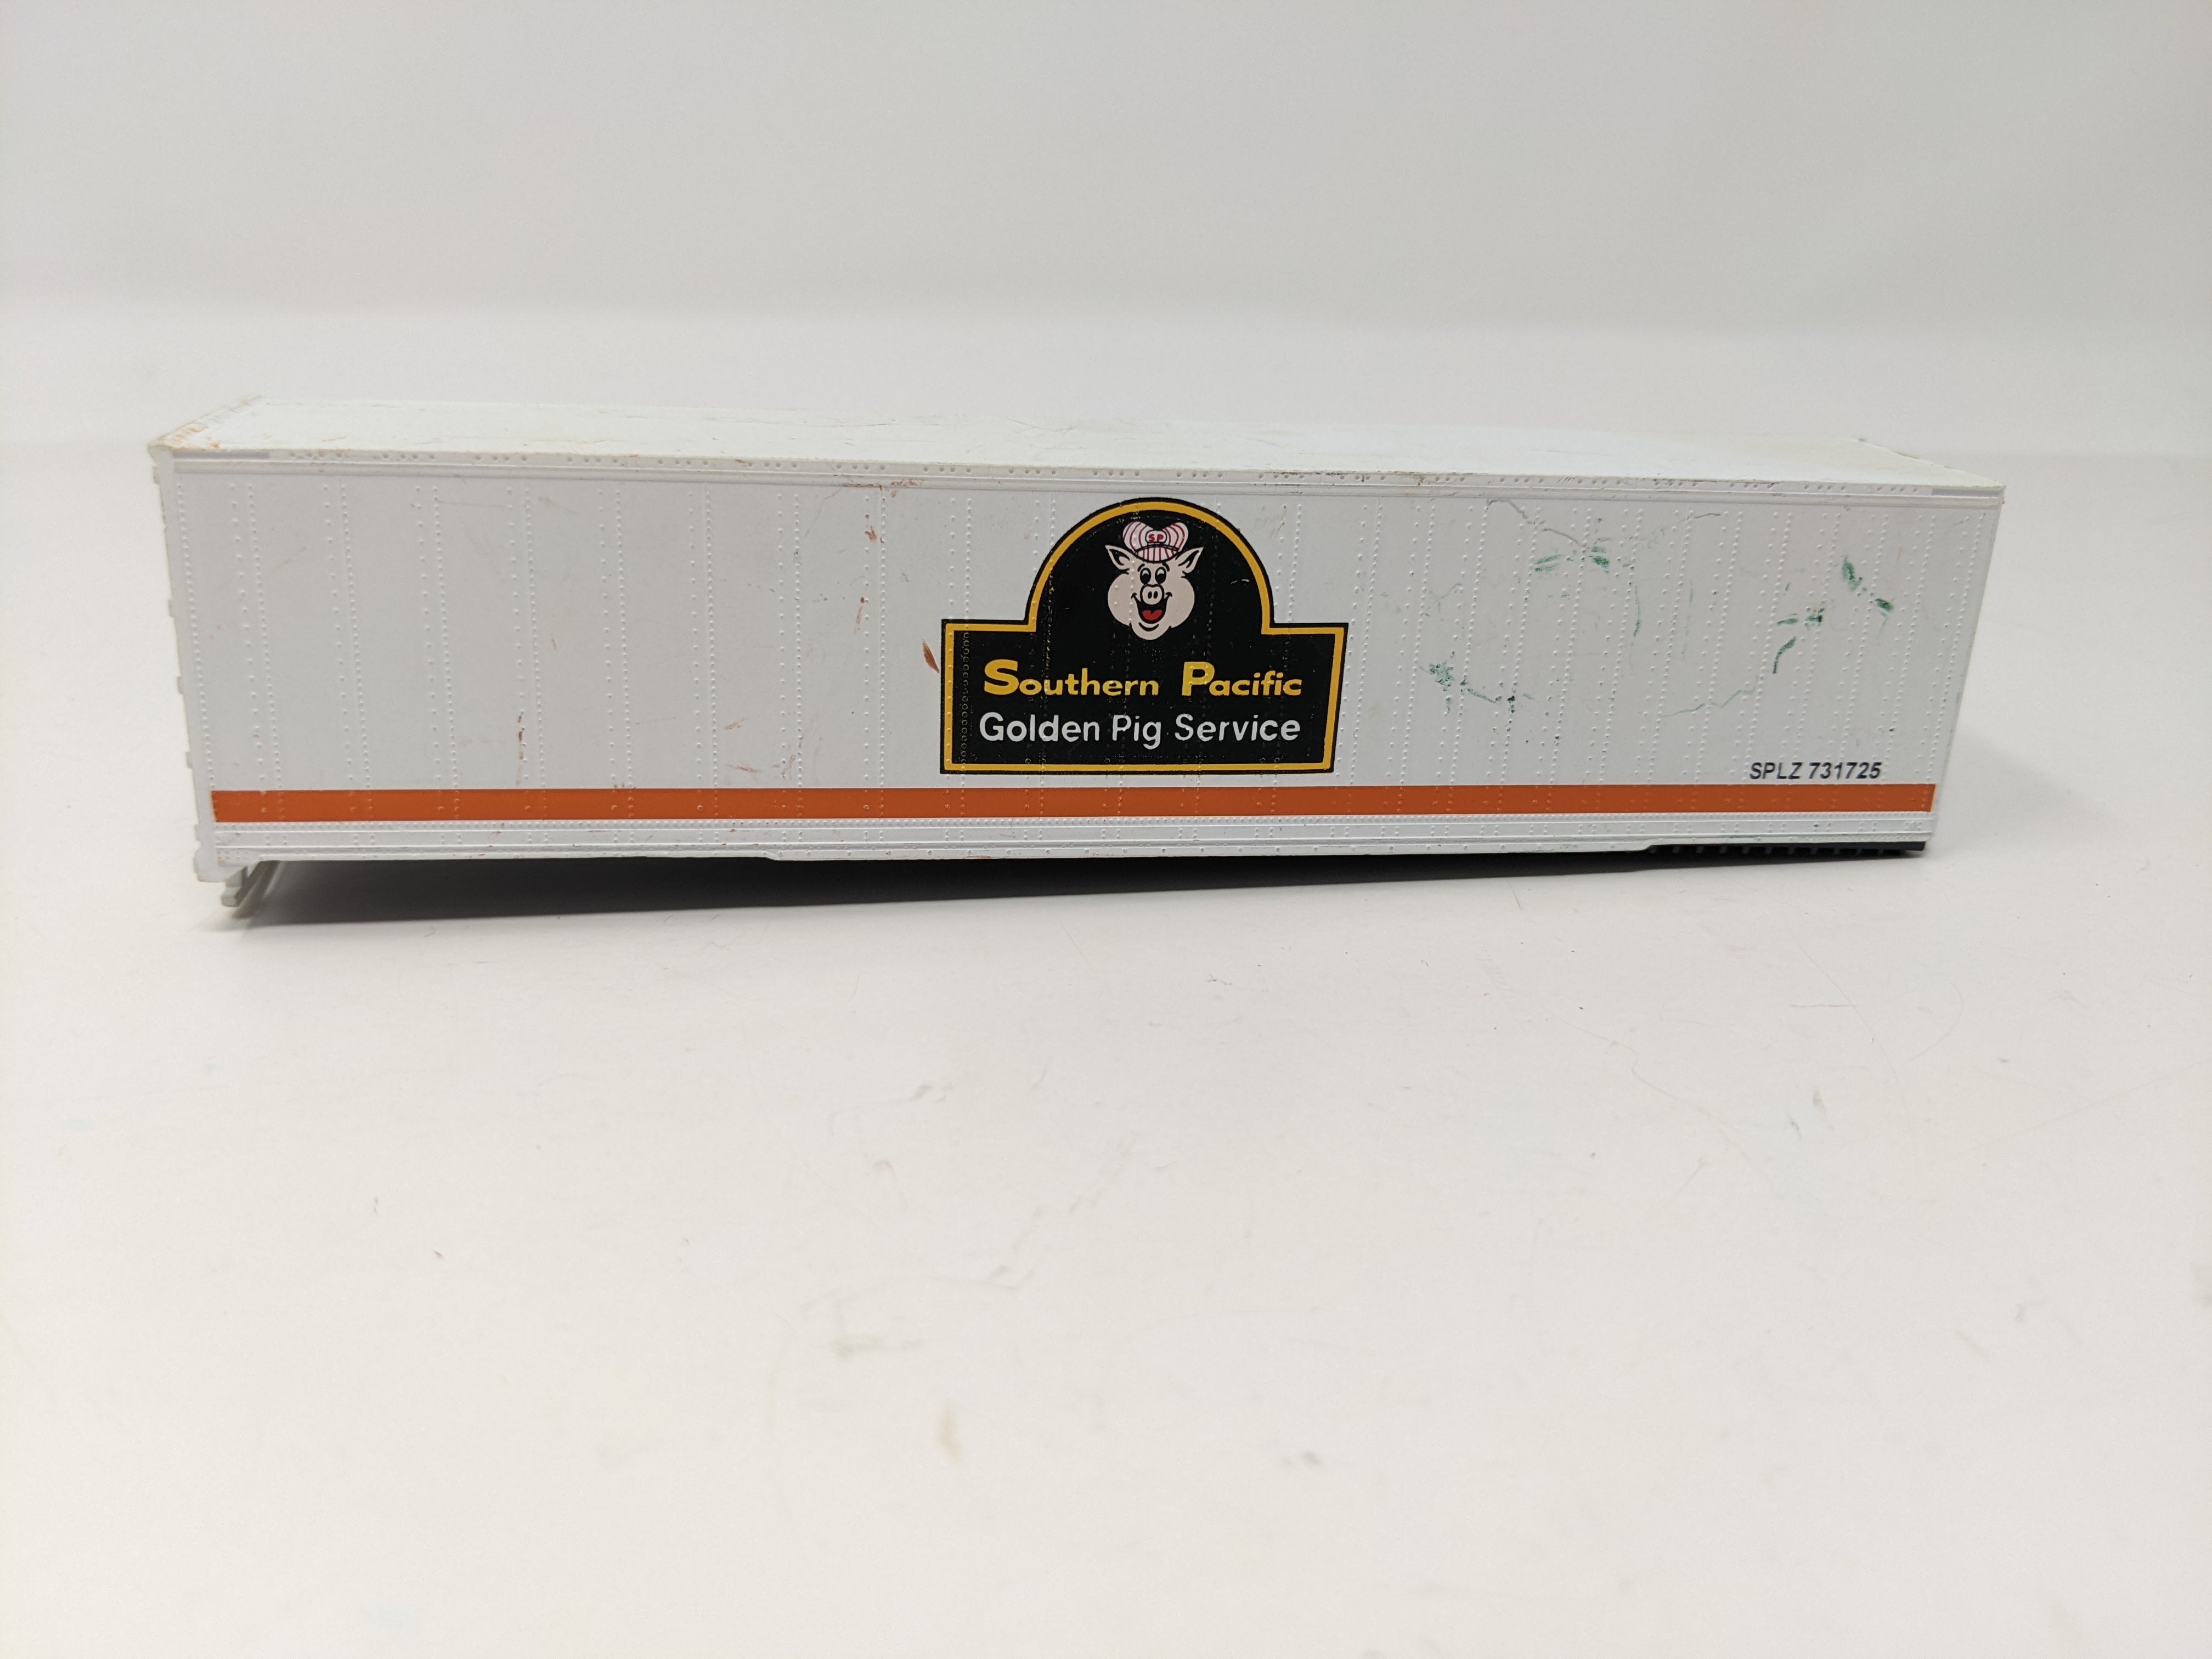 USED Walthers HO Scale, 45' Trailer (Missing parts), Southern Pacific SPLZ #731725, Read Description